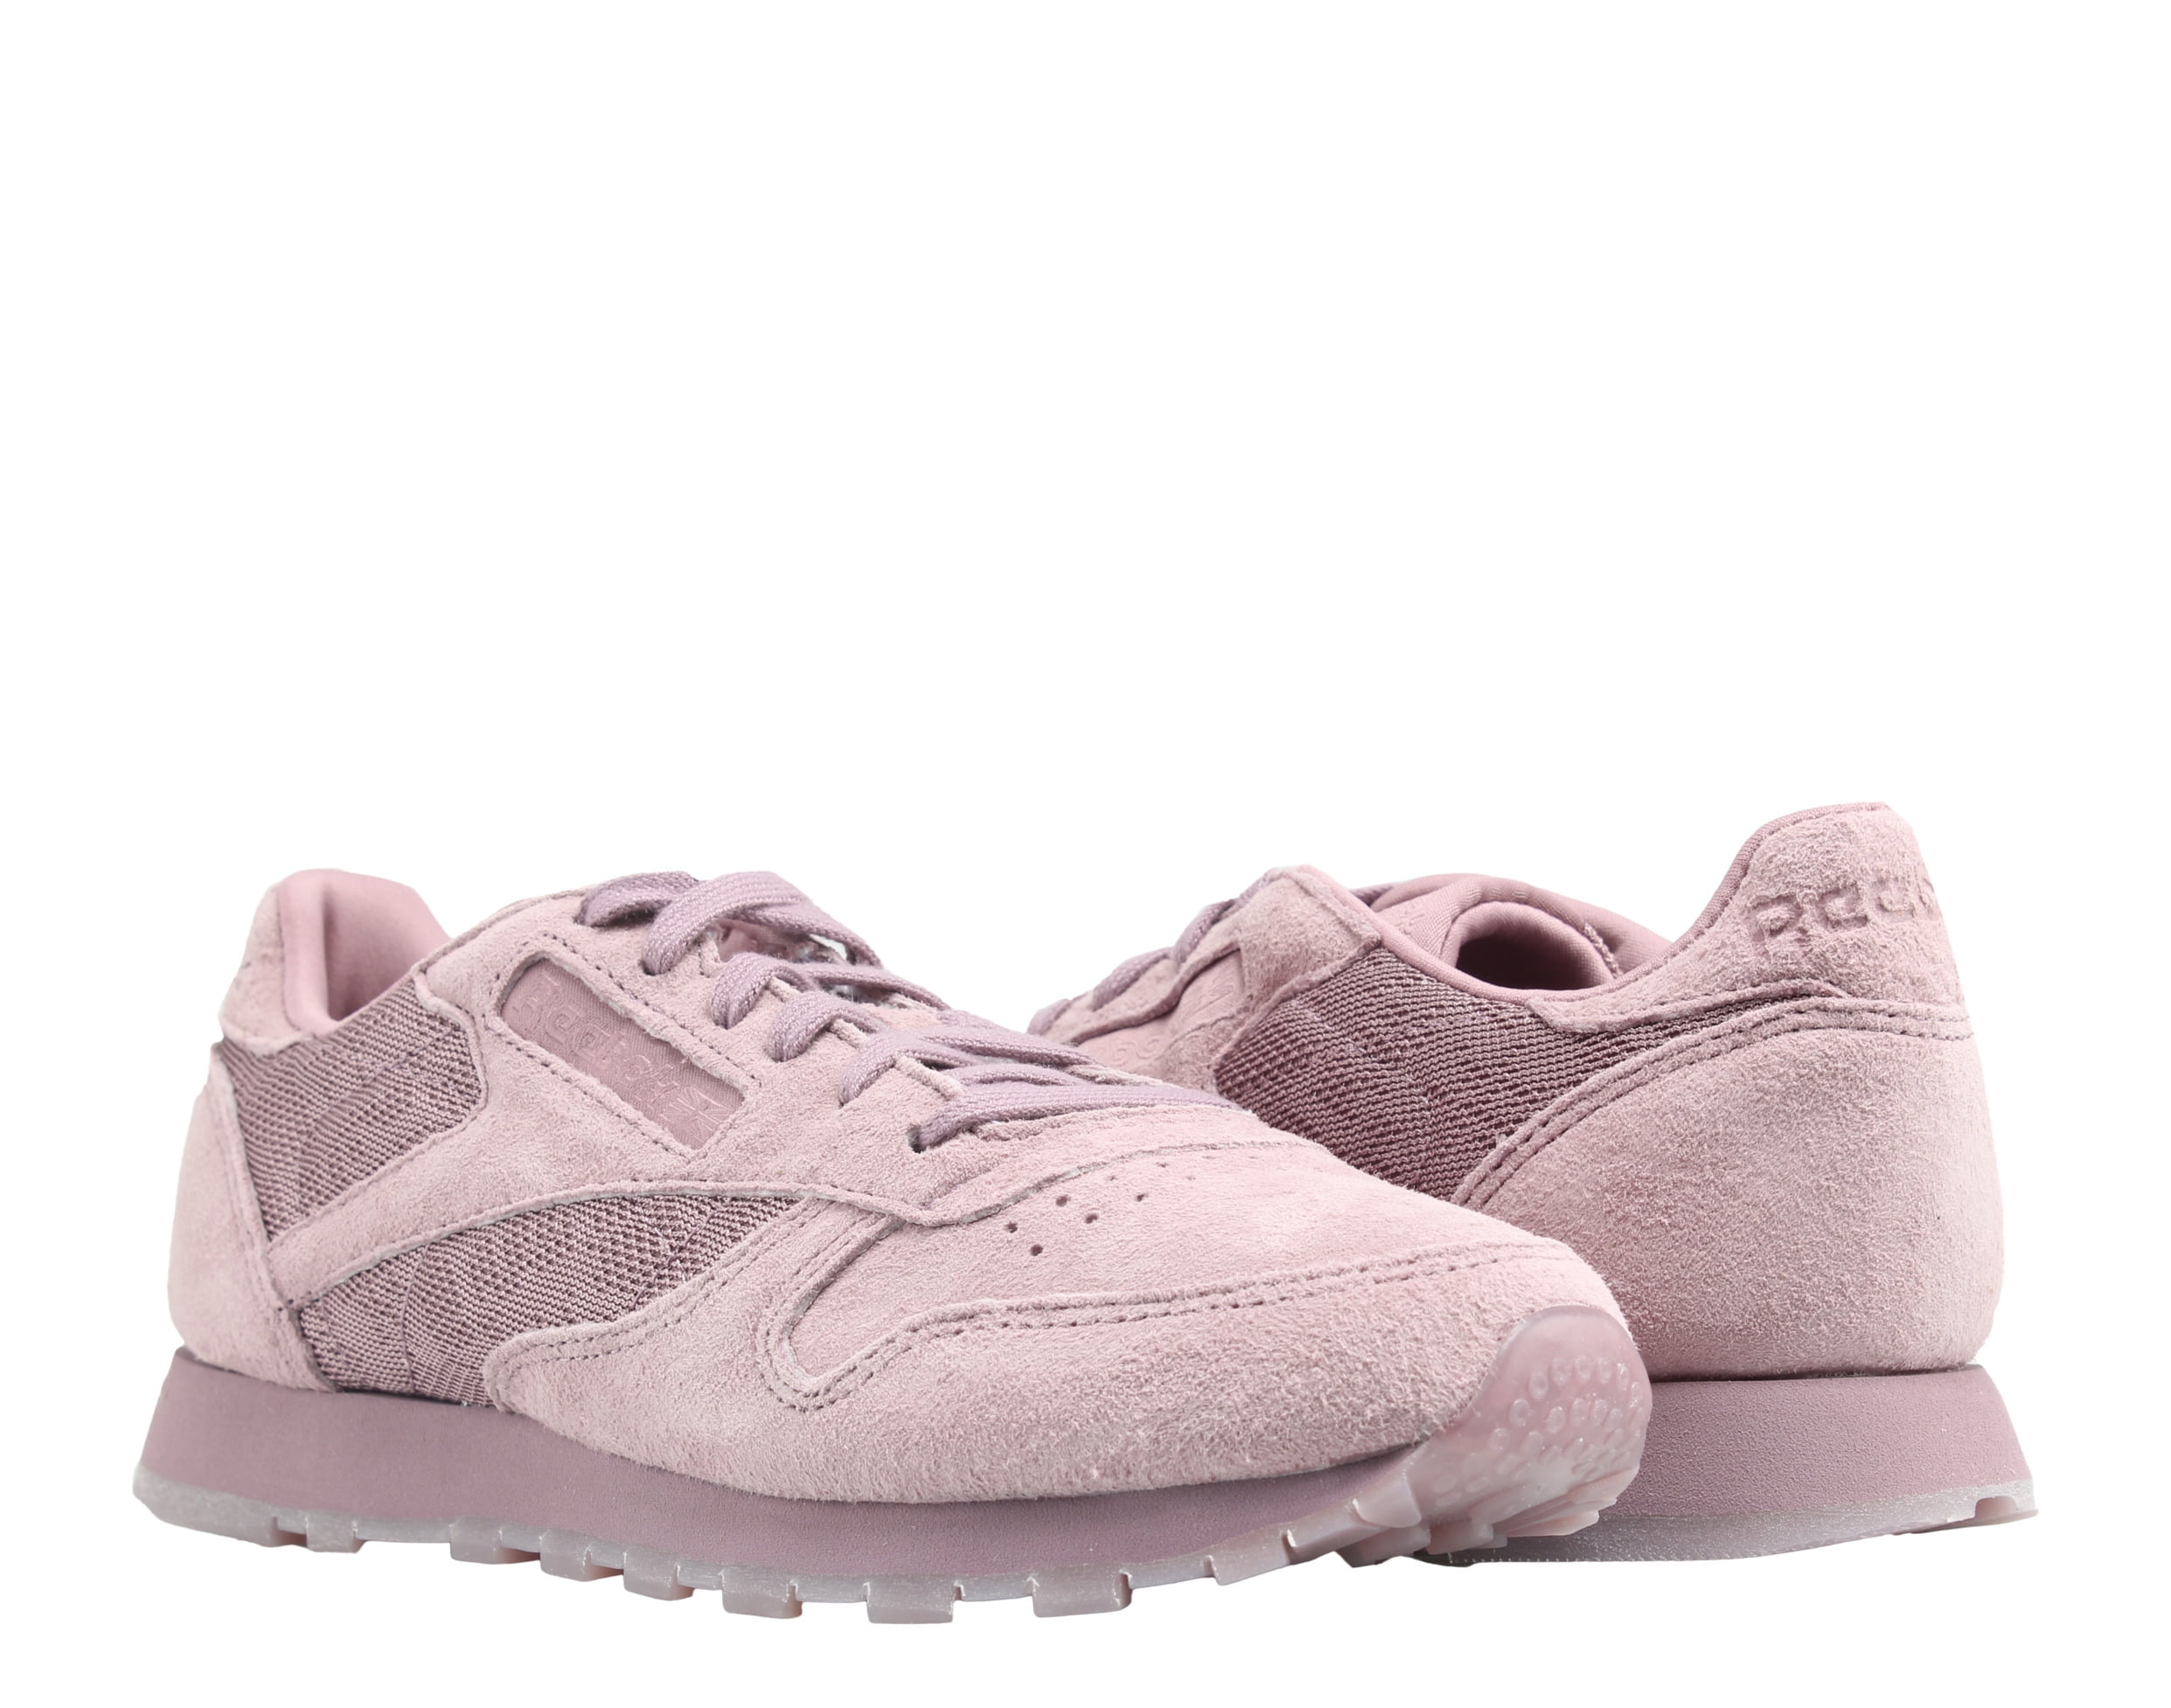 reebok cl leather smokey orchid lace